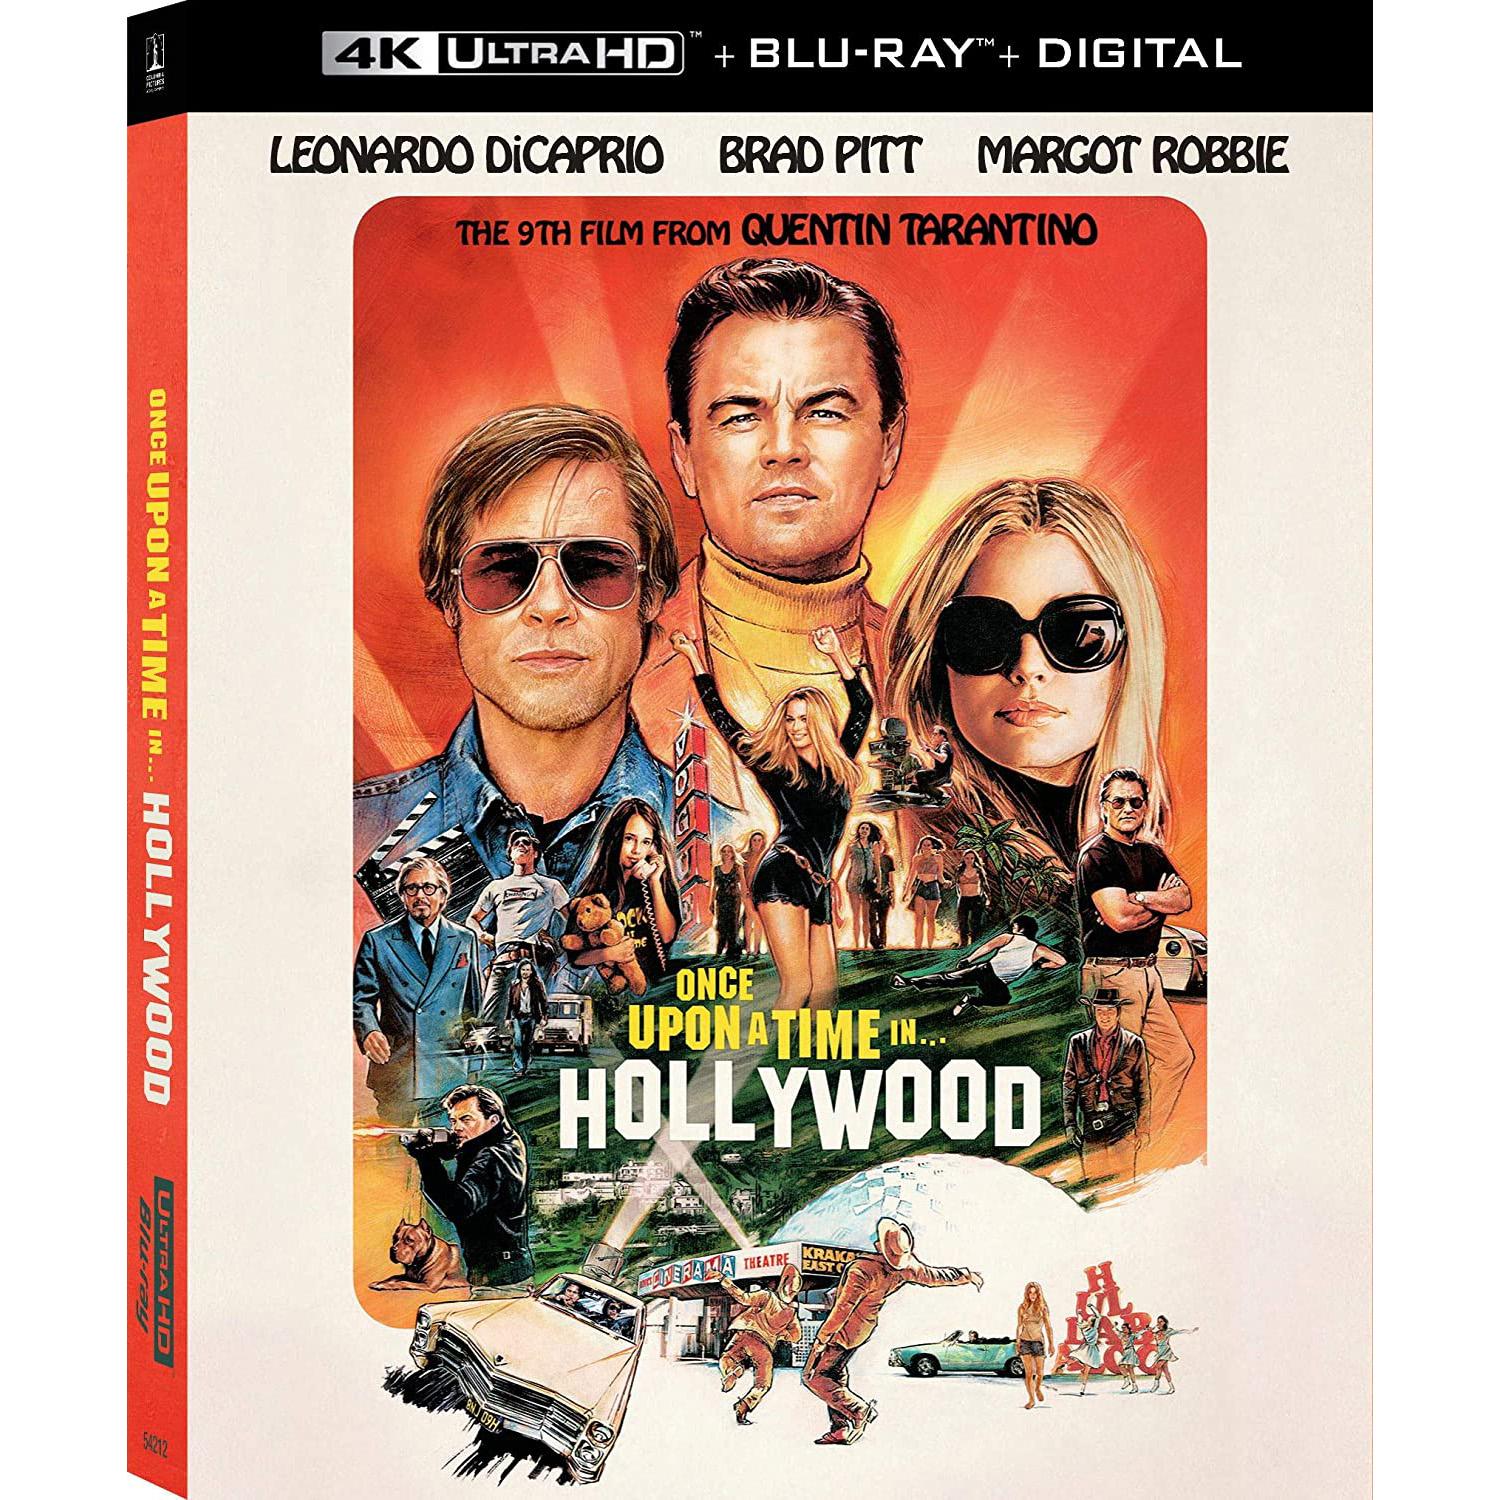 Once Upon a Time in Hollywood or Zombieland 4K Blu-ray for $15